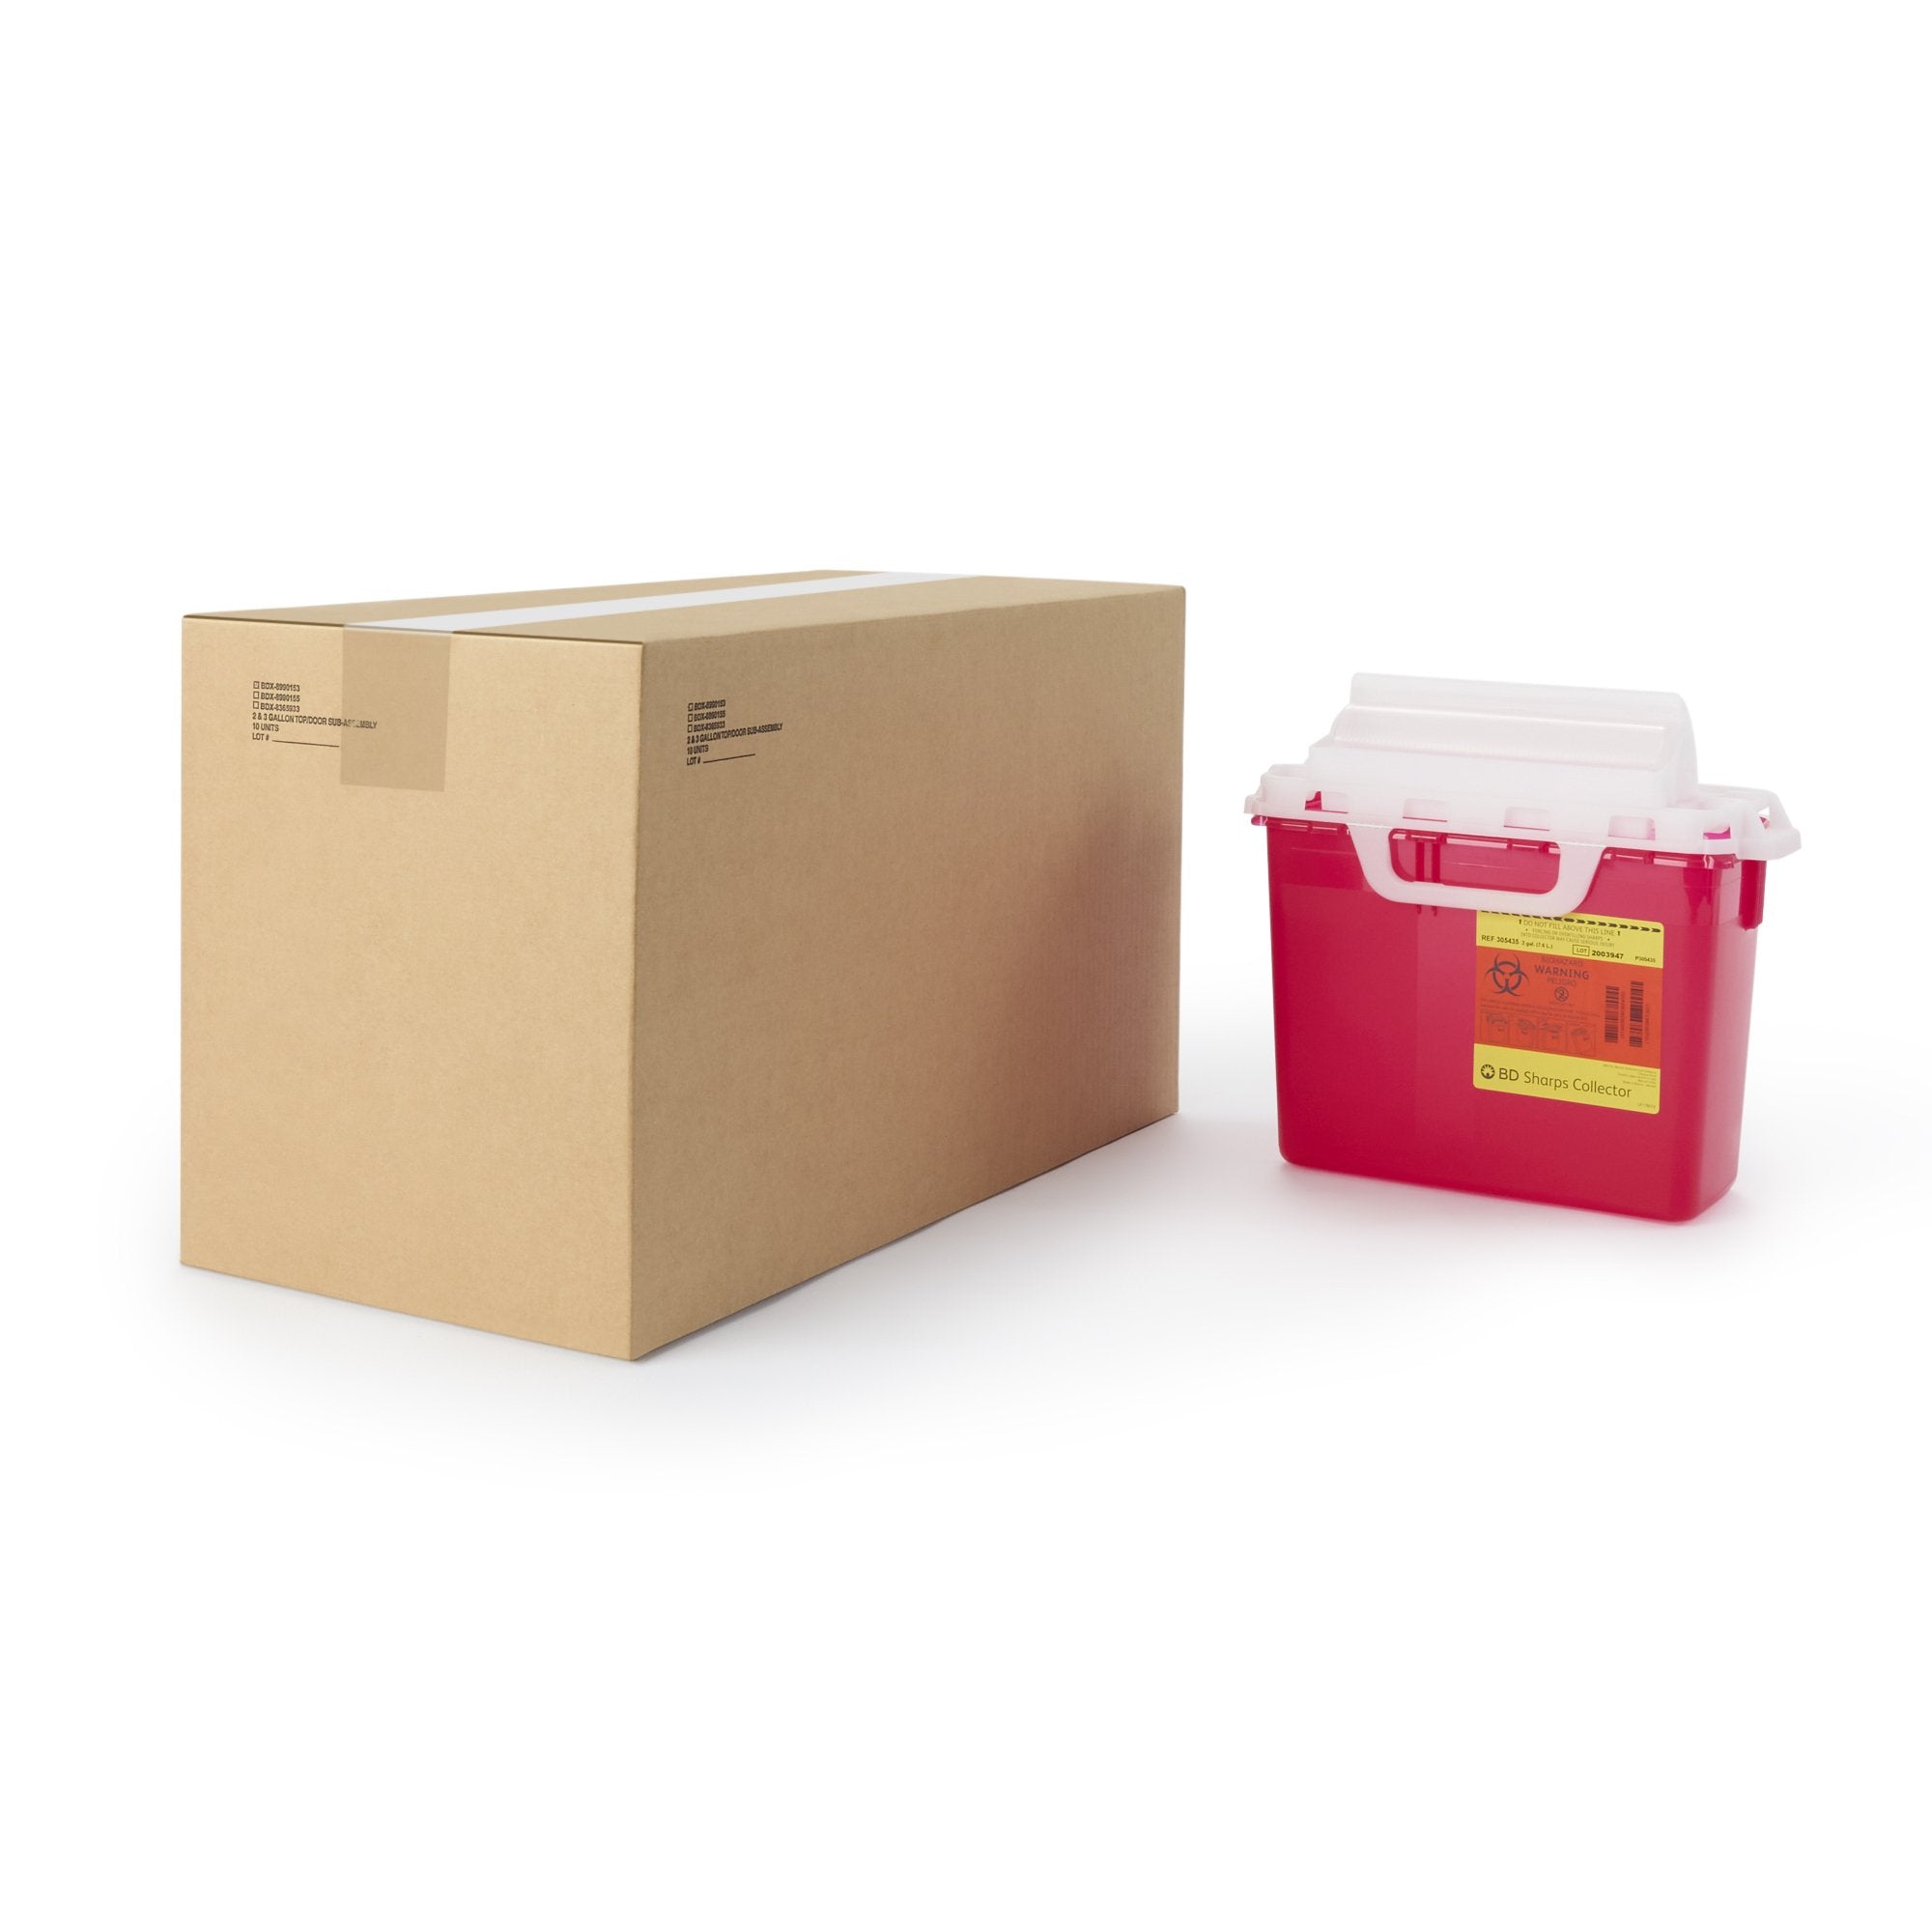 Sharps Container BD Red Base 12-1/2 H X 10-7/10 W X 6 D Inch Horizontal Entry 2 Gallon